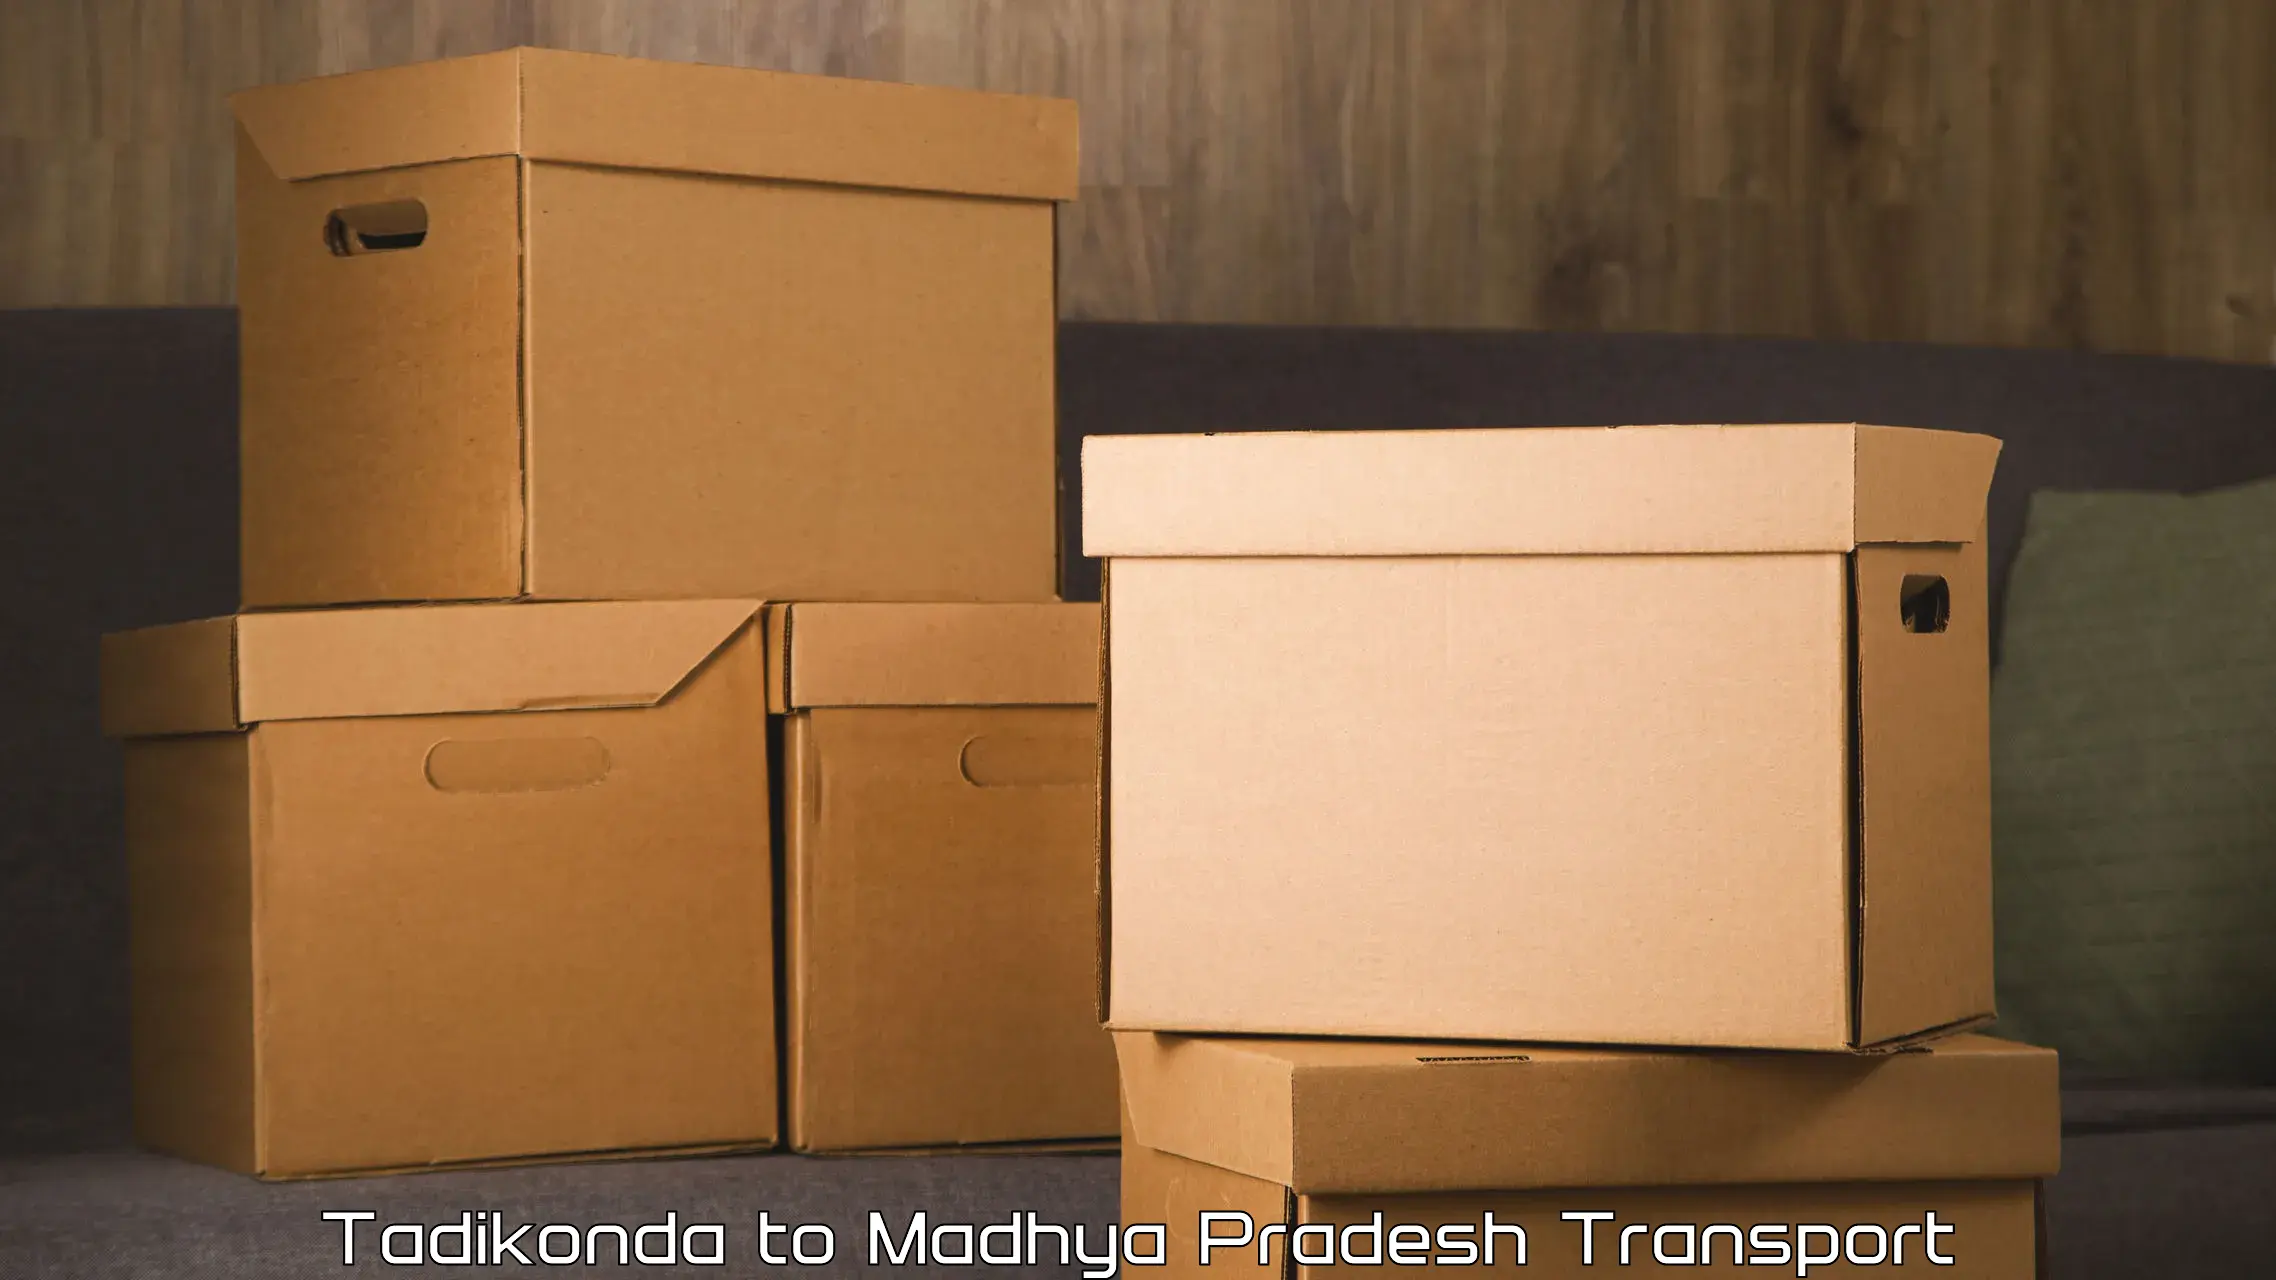 Goods delivery service Tadikonda to Bhind